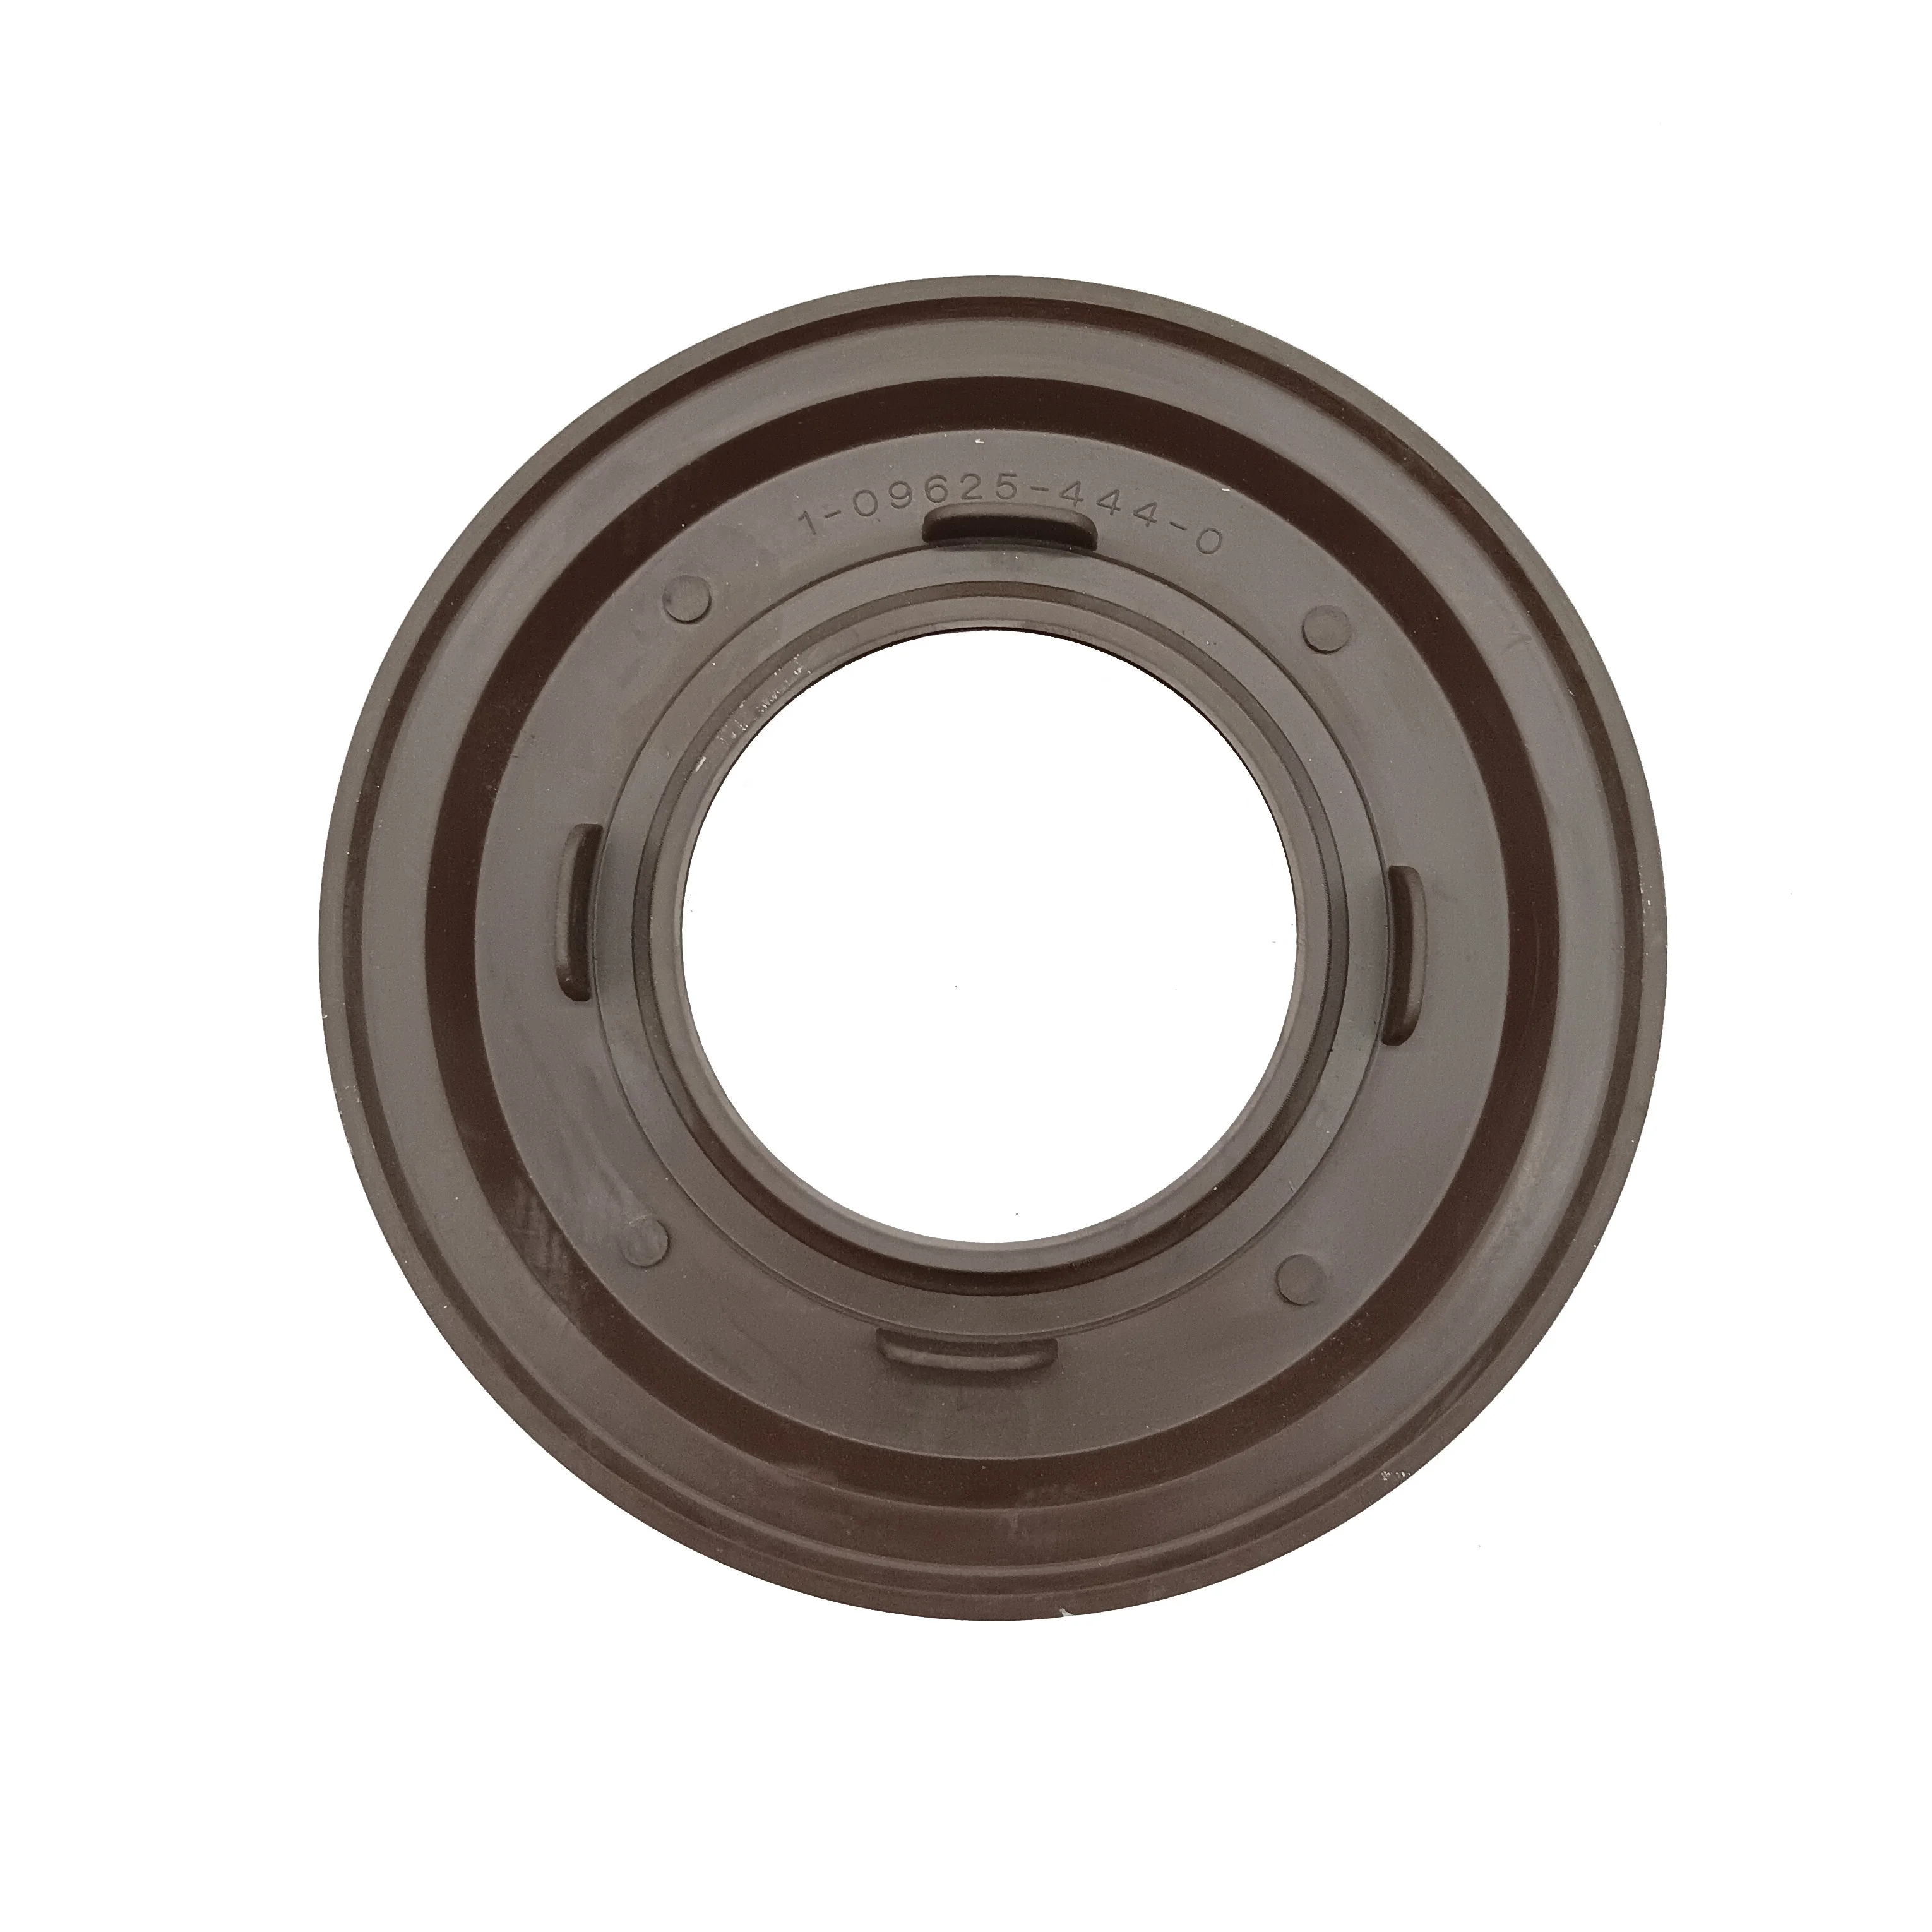 Hot sale TC3Y 78*163*16 OEM 1 09625 444 0 rubber seals Wheel Hub Oil Seal applicable to ISUZU (1600627166091)